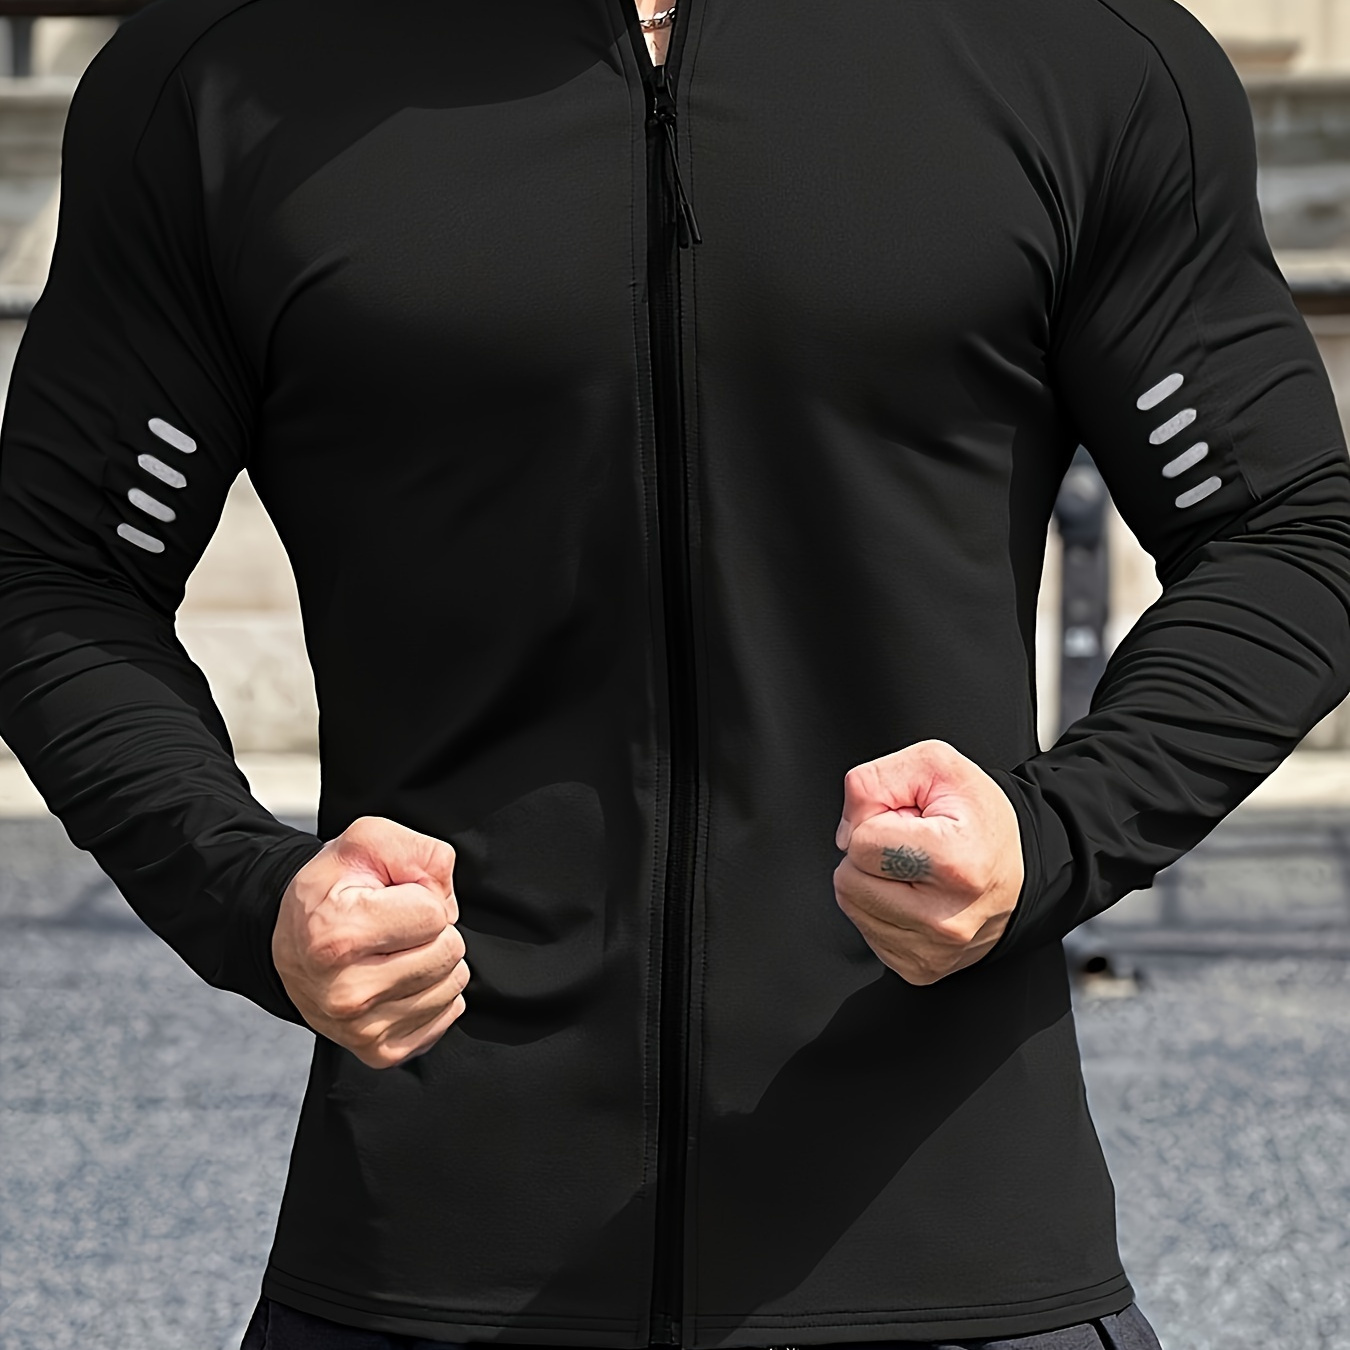 

Men's Sporty Style Zip Up Long Sleeve With Reflective Accents Basketball Training Shirt, Sun Protection Shirt Jacket, Quick Dry For Athletic Outdoor Activities